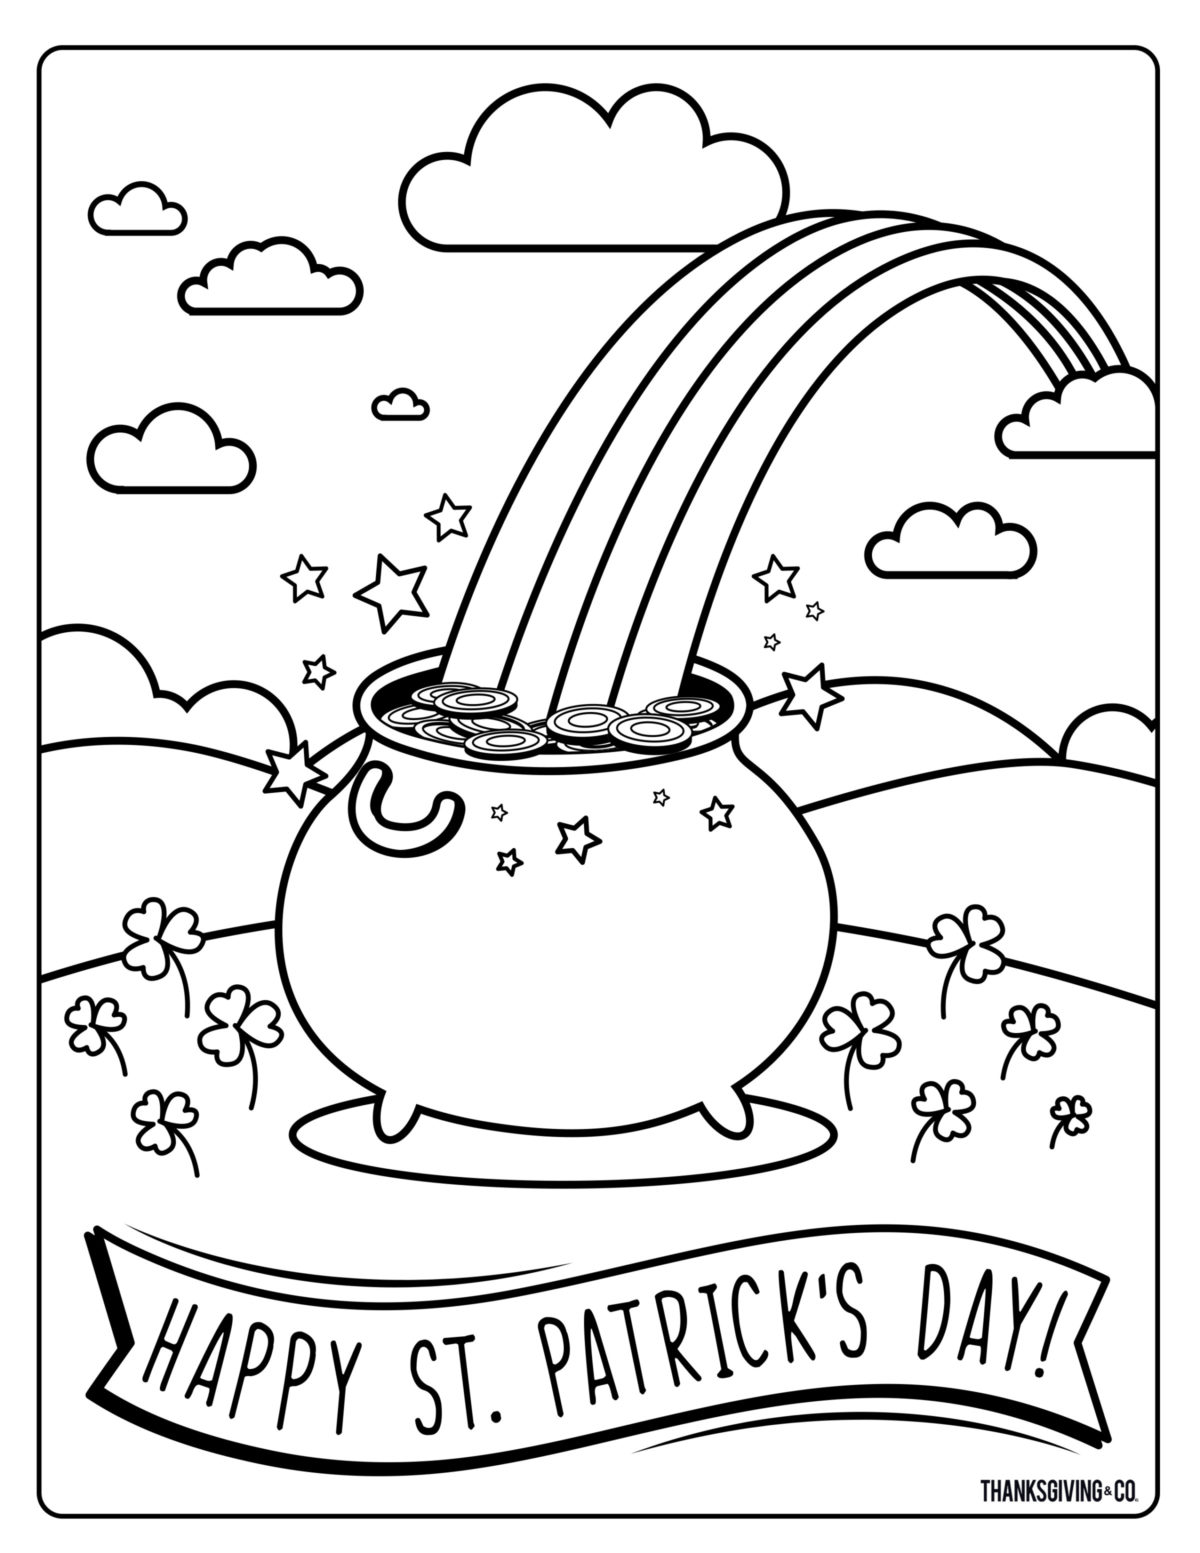 20 printable, whimsical St. Patrick's Day coloring pages for kids